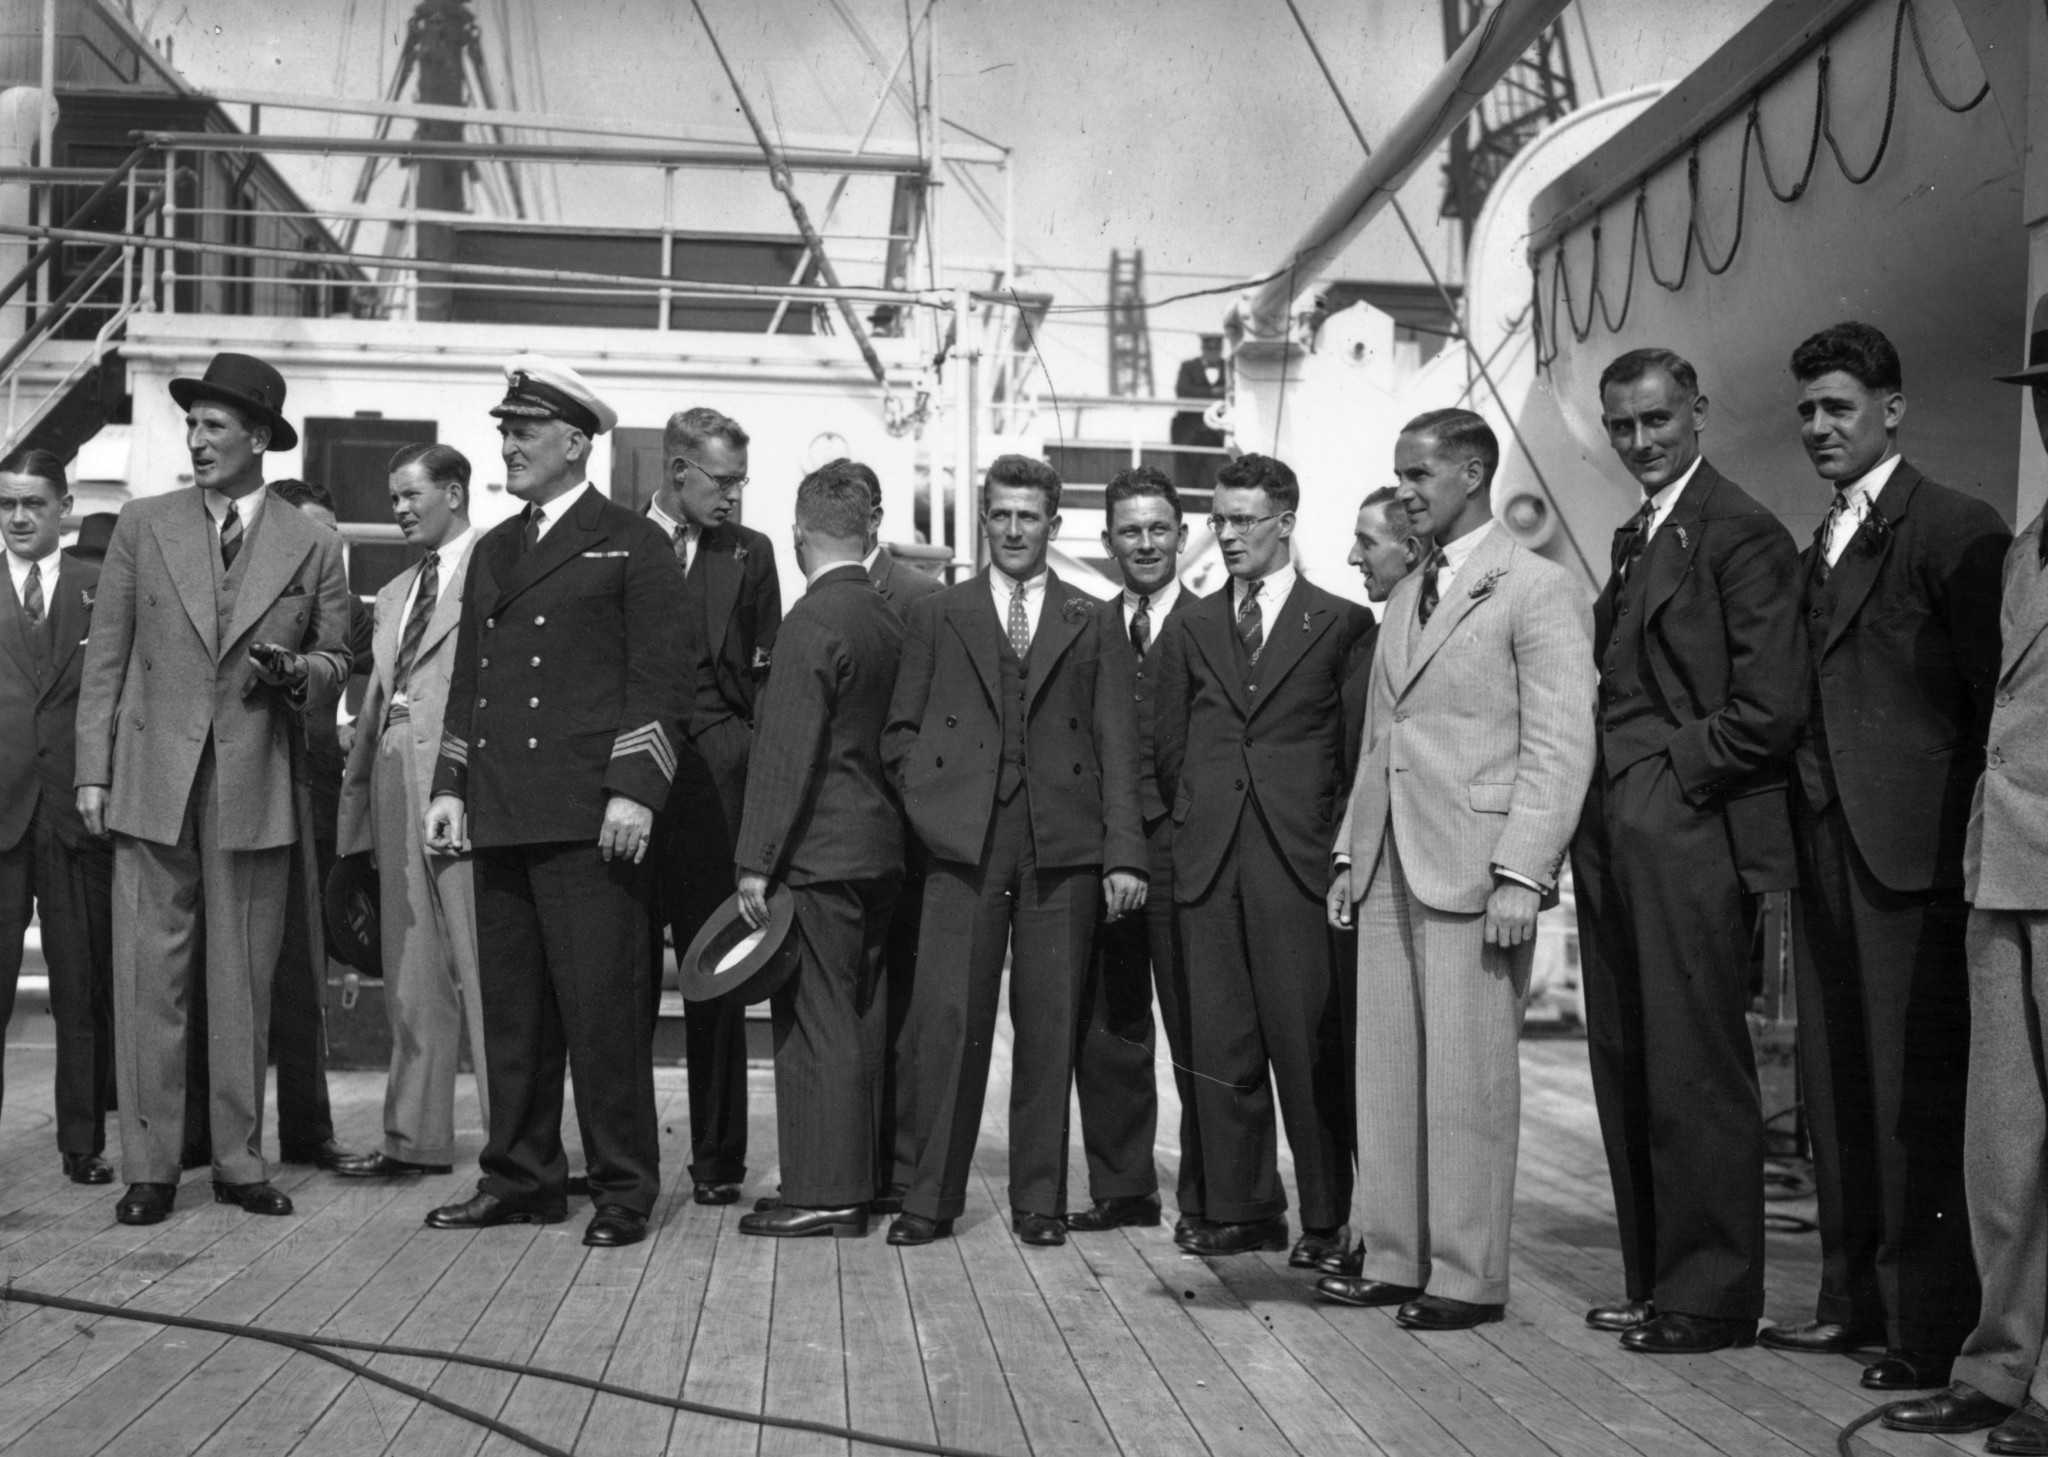 England's cricketers did not travel by air but departed for Australia on the steam ship Orontes in 1932 ©Getty Images